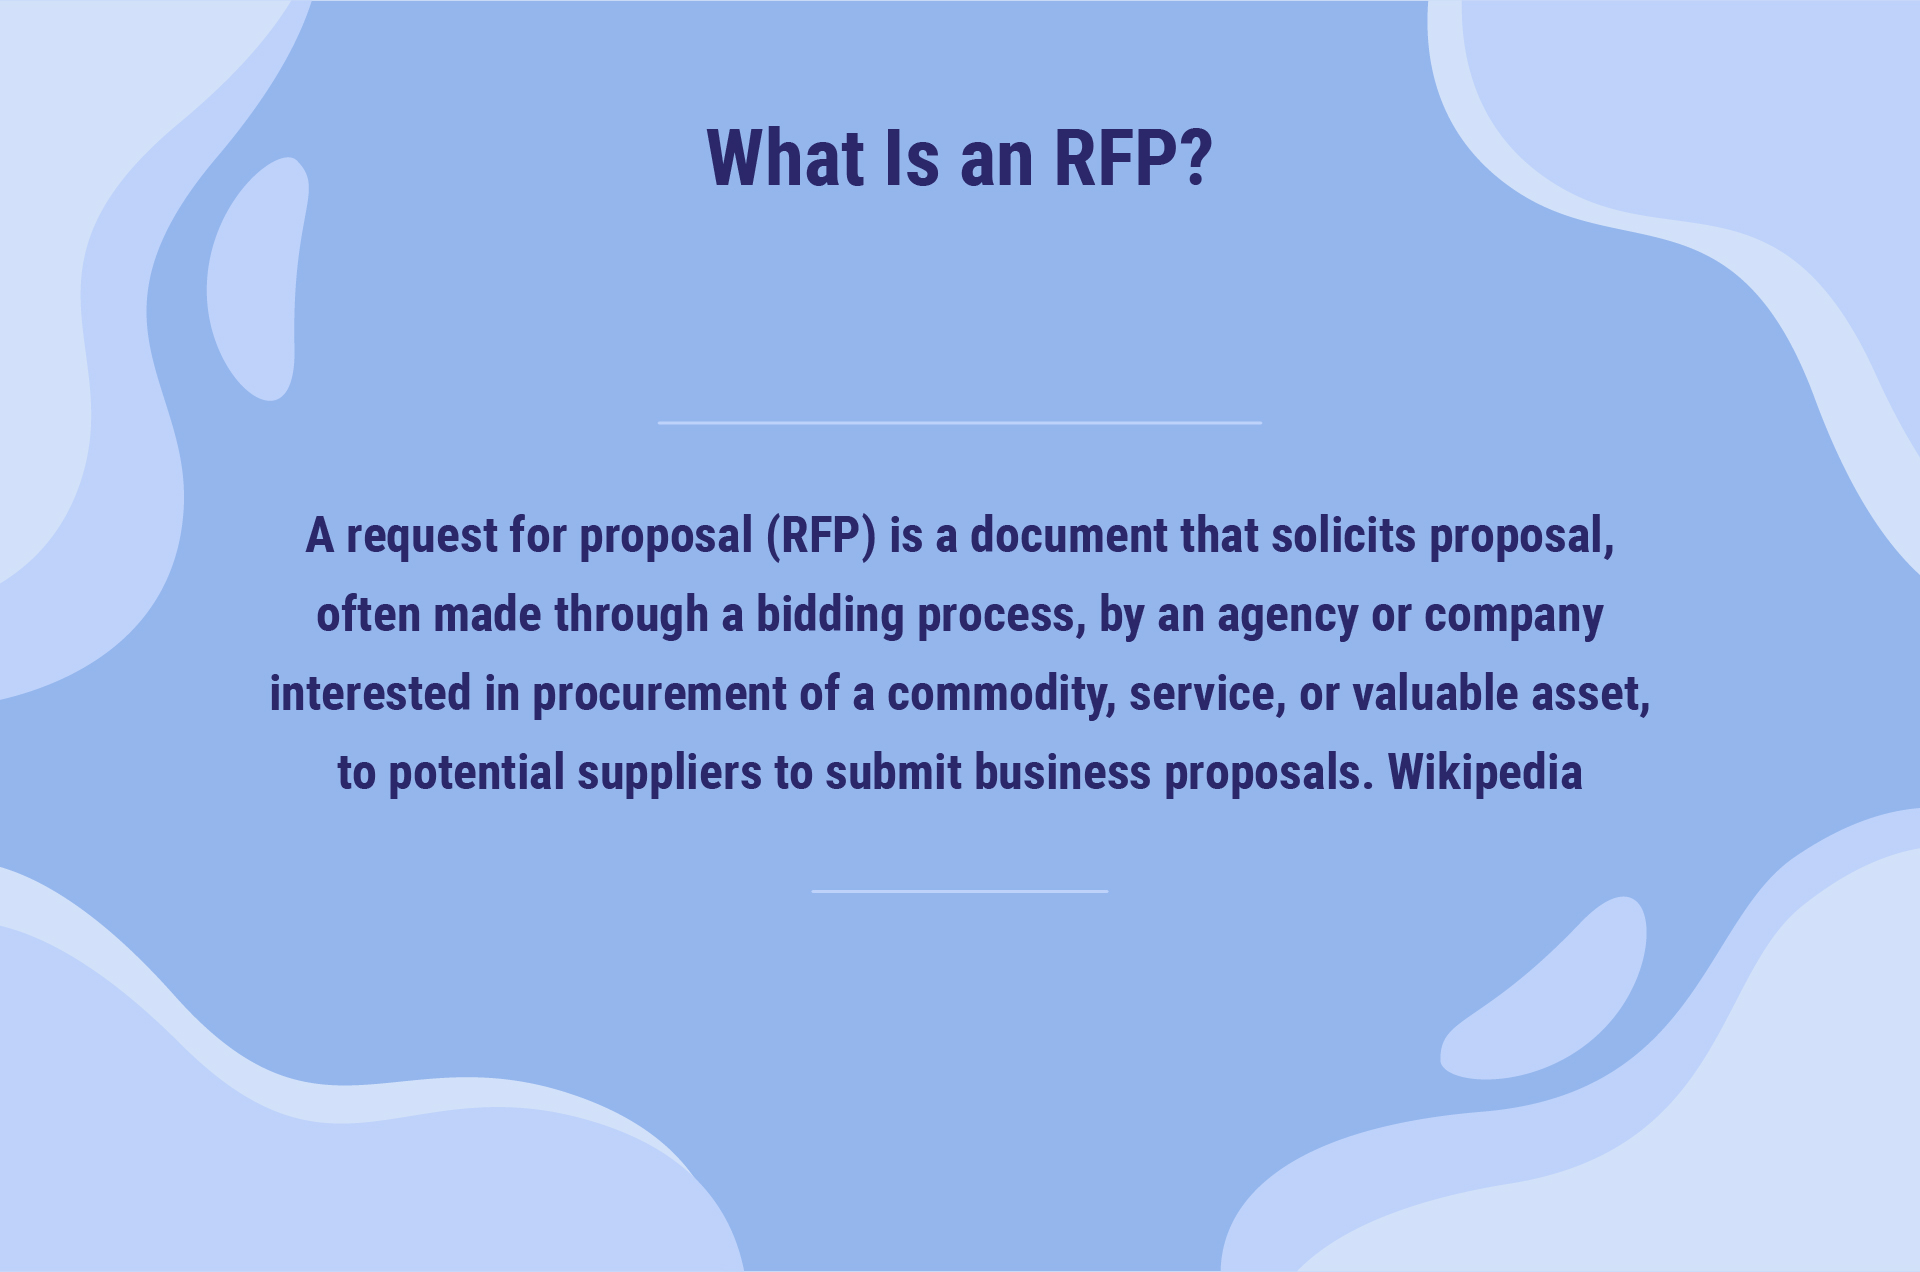 wikipedia definition of RFP